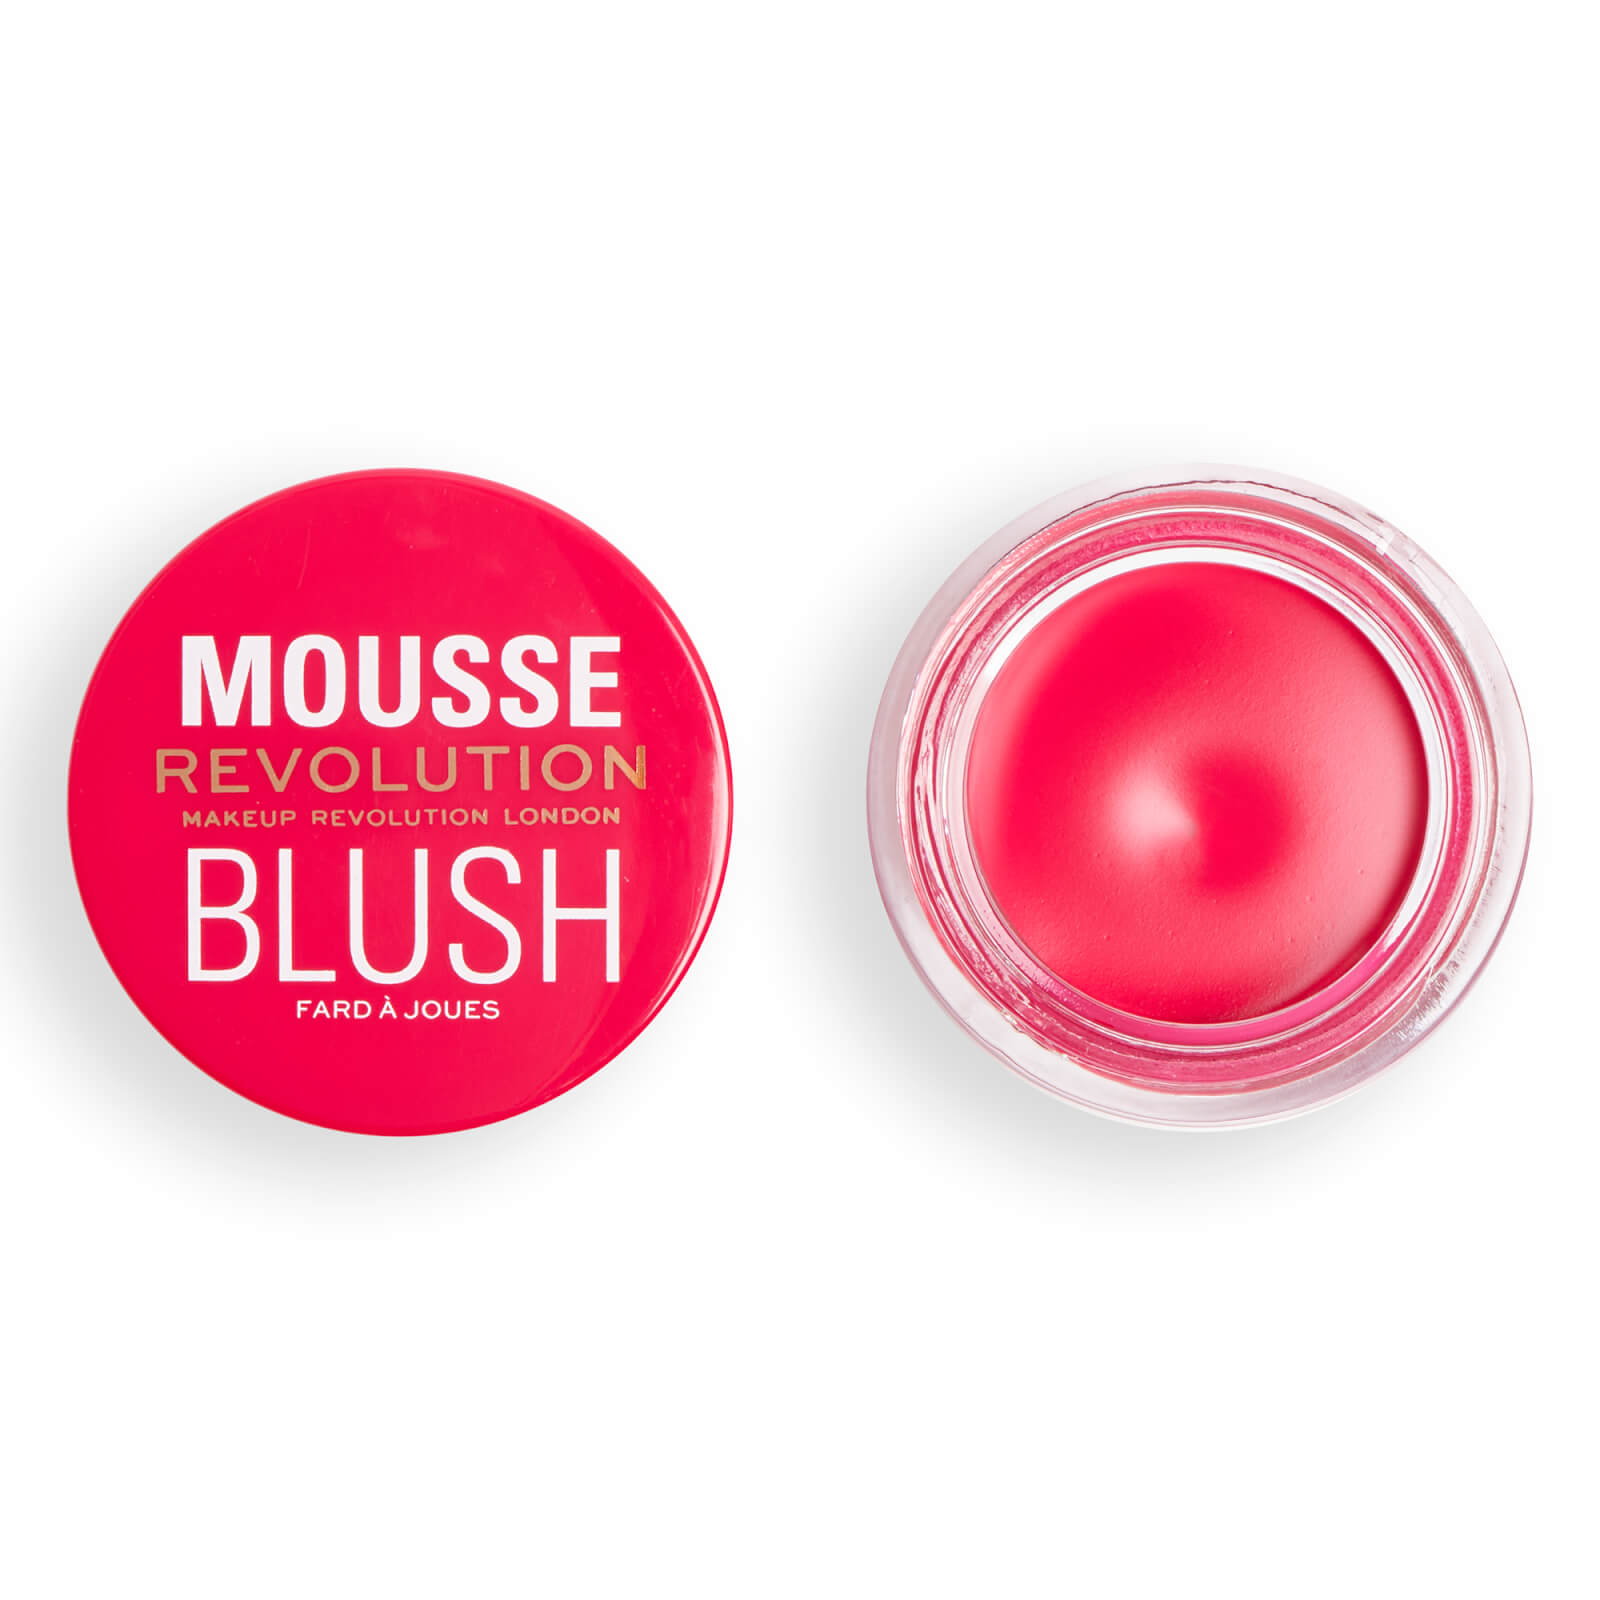 Revolution Mousse Blusher (various Shades) - Juicy Fuschia Pink